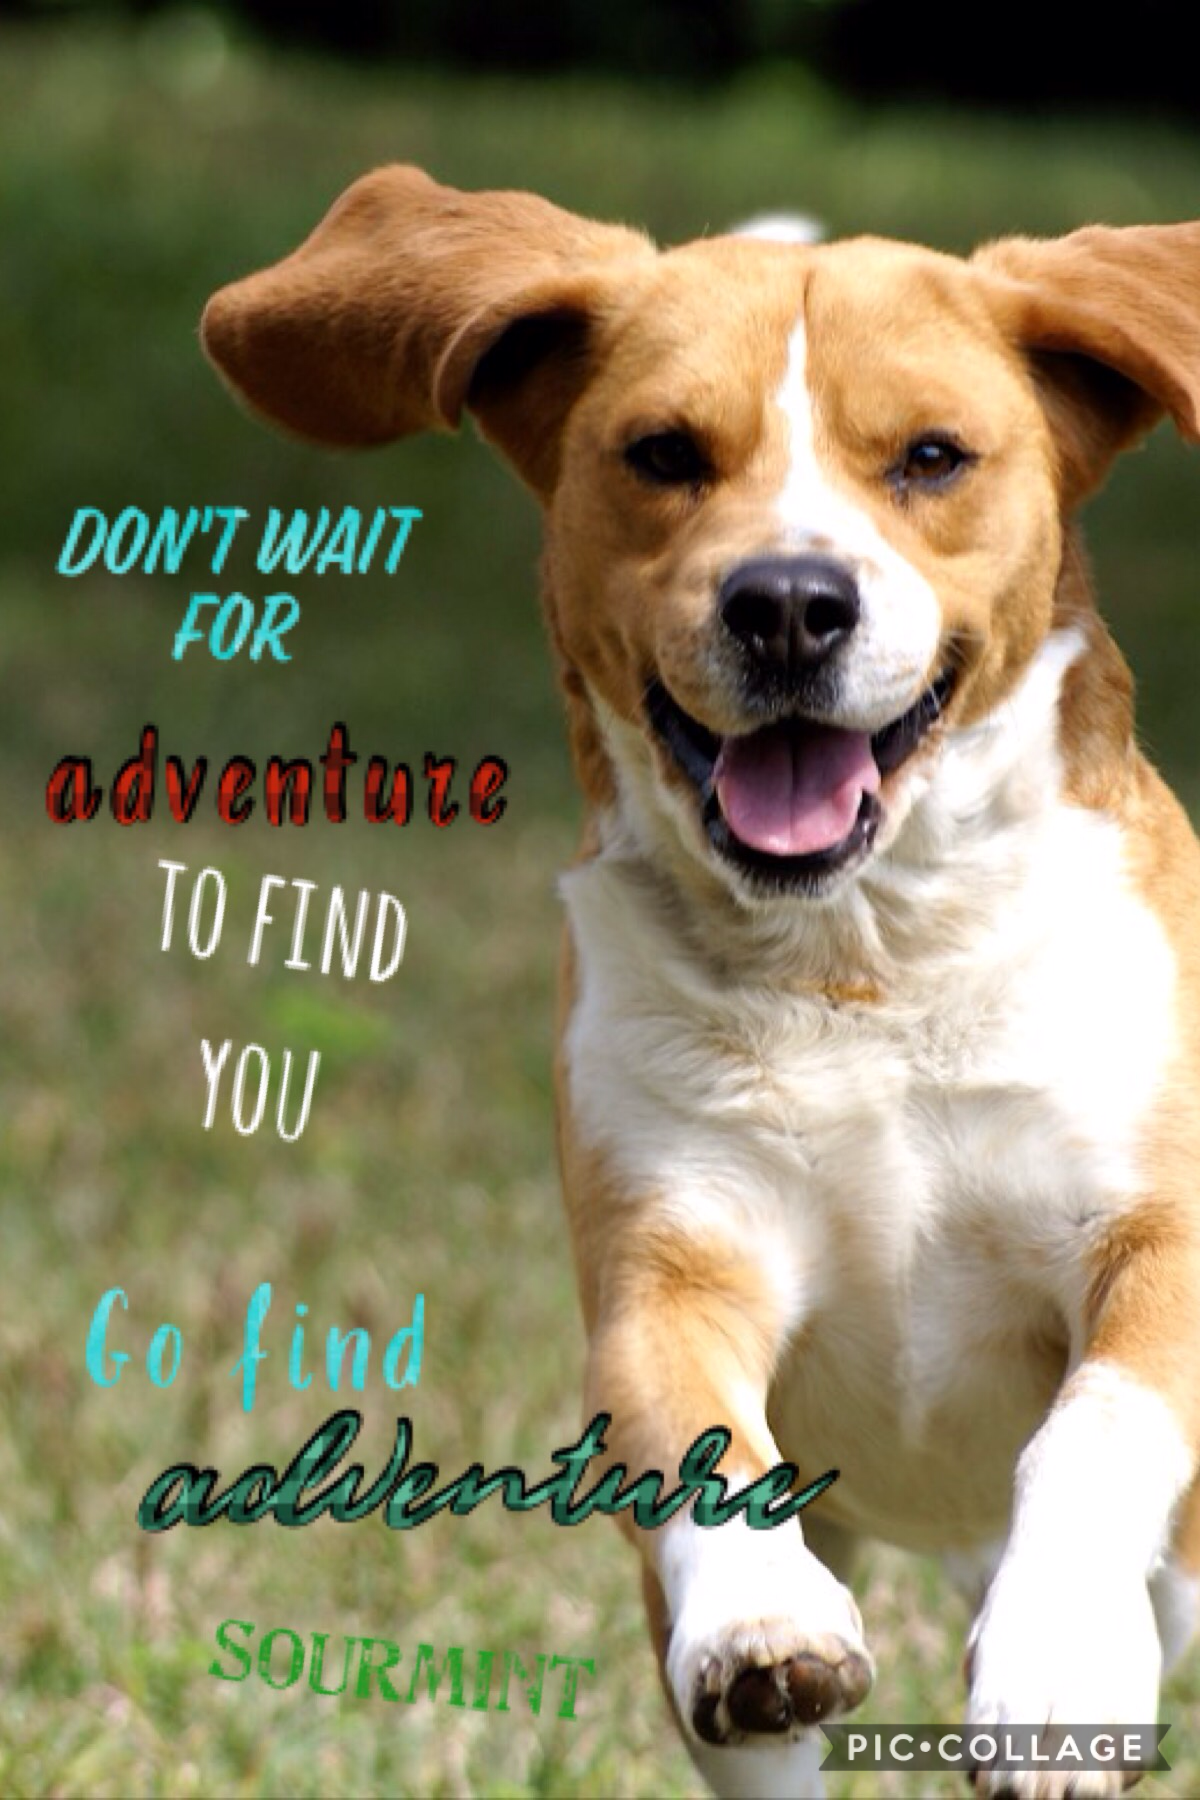 Don't wait for adventure to find you, go find adventure!